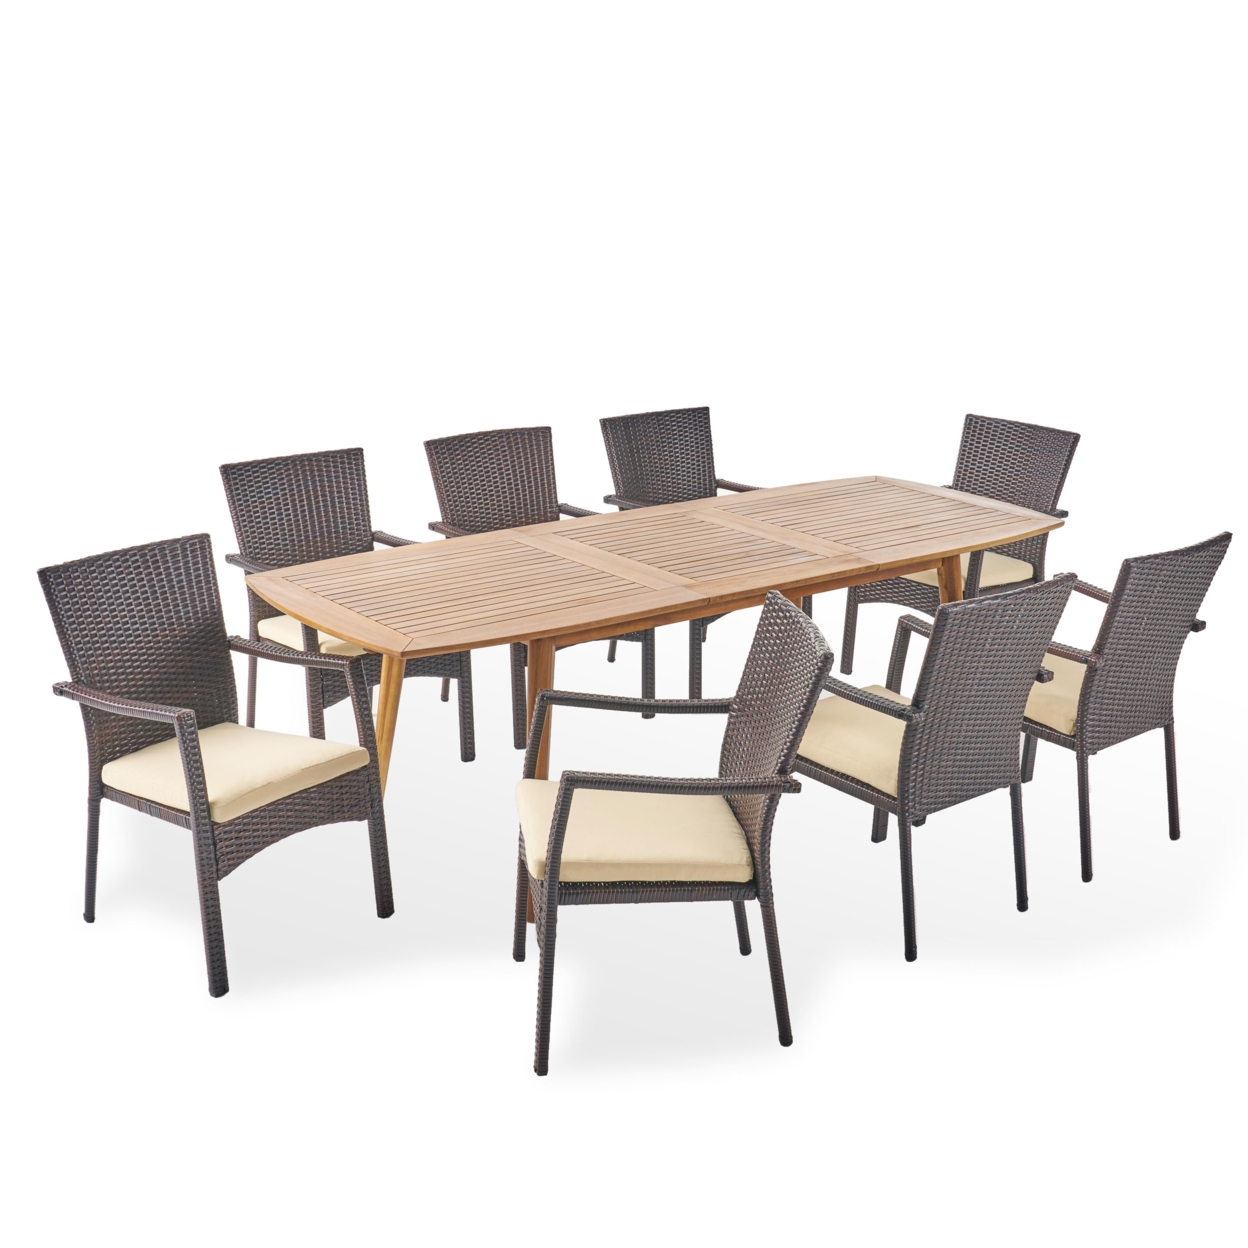 Jabari Outdoor Wood And Wicker Expandable 8 Seater Dining Set - Teak, Brown, Crme